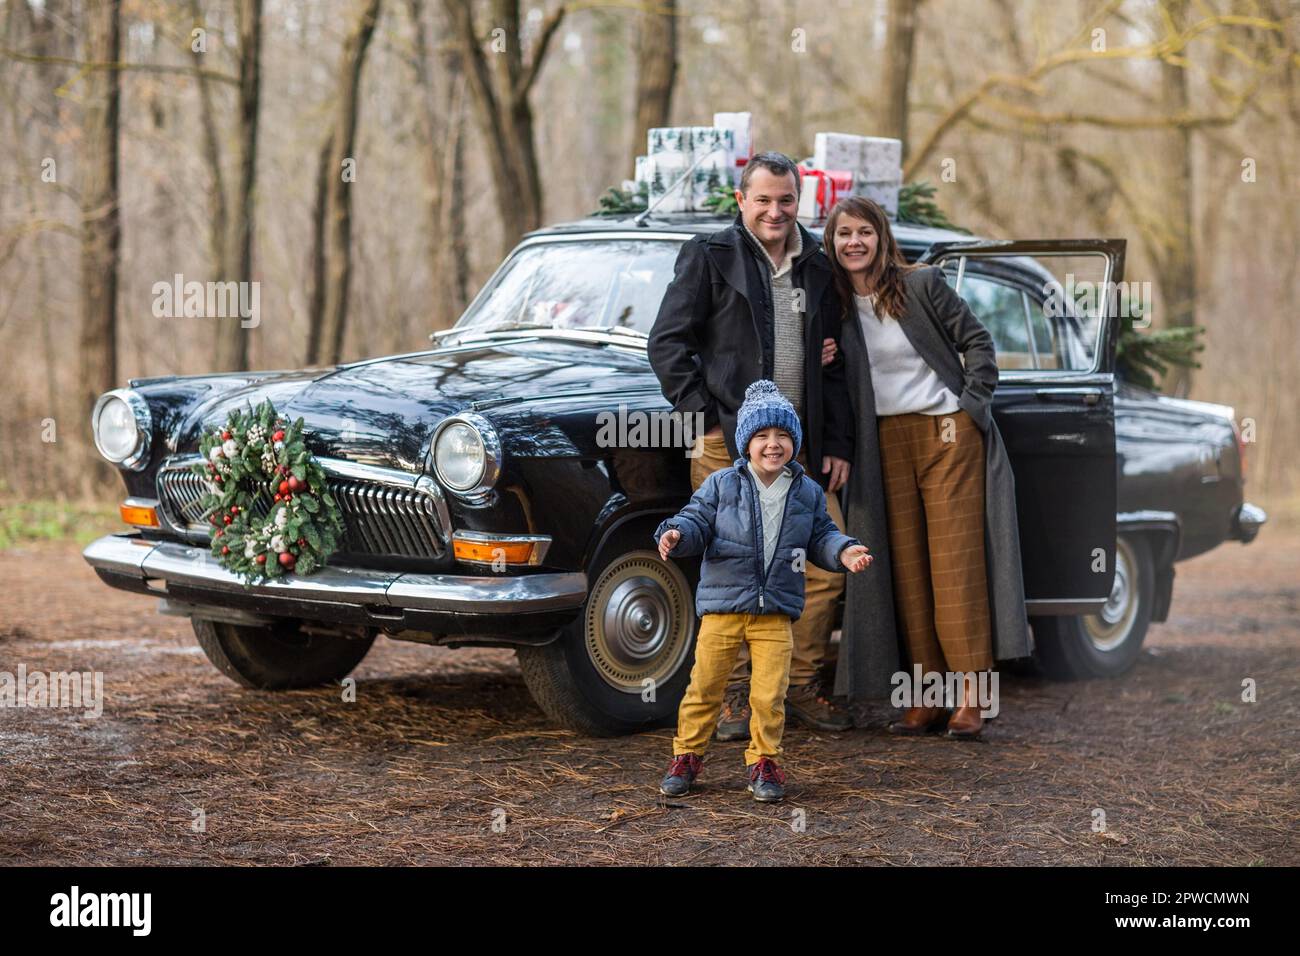 Smiling adult man and woman with boy in warm clothes standing at vintage car with Christmas presents Stock Photo